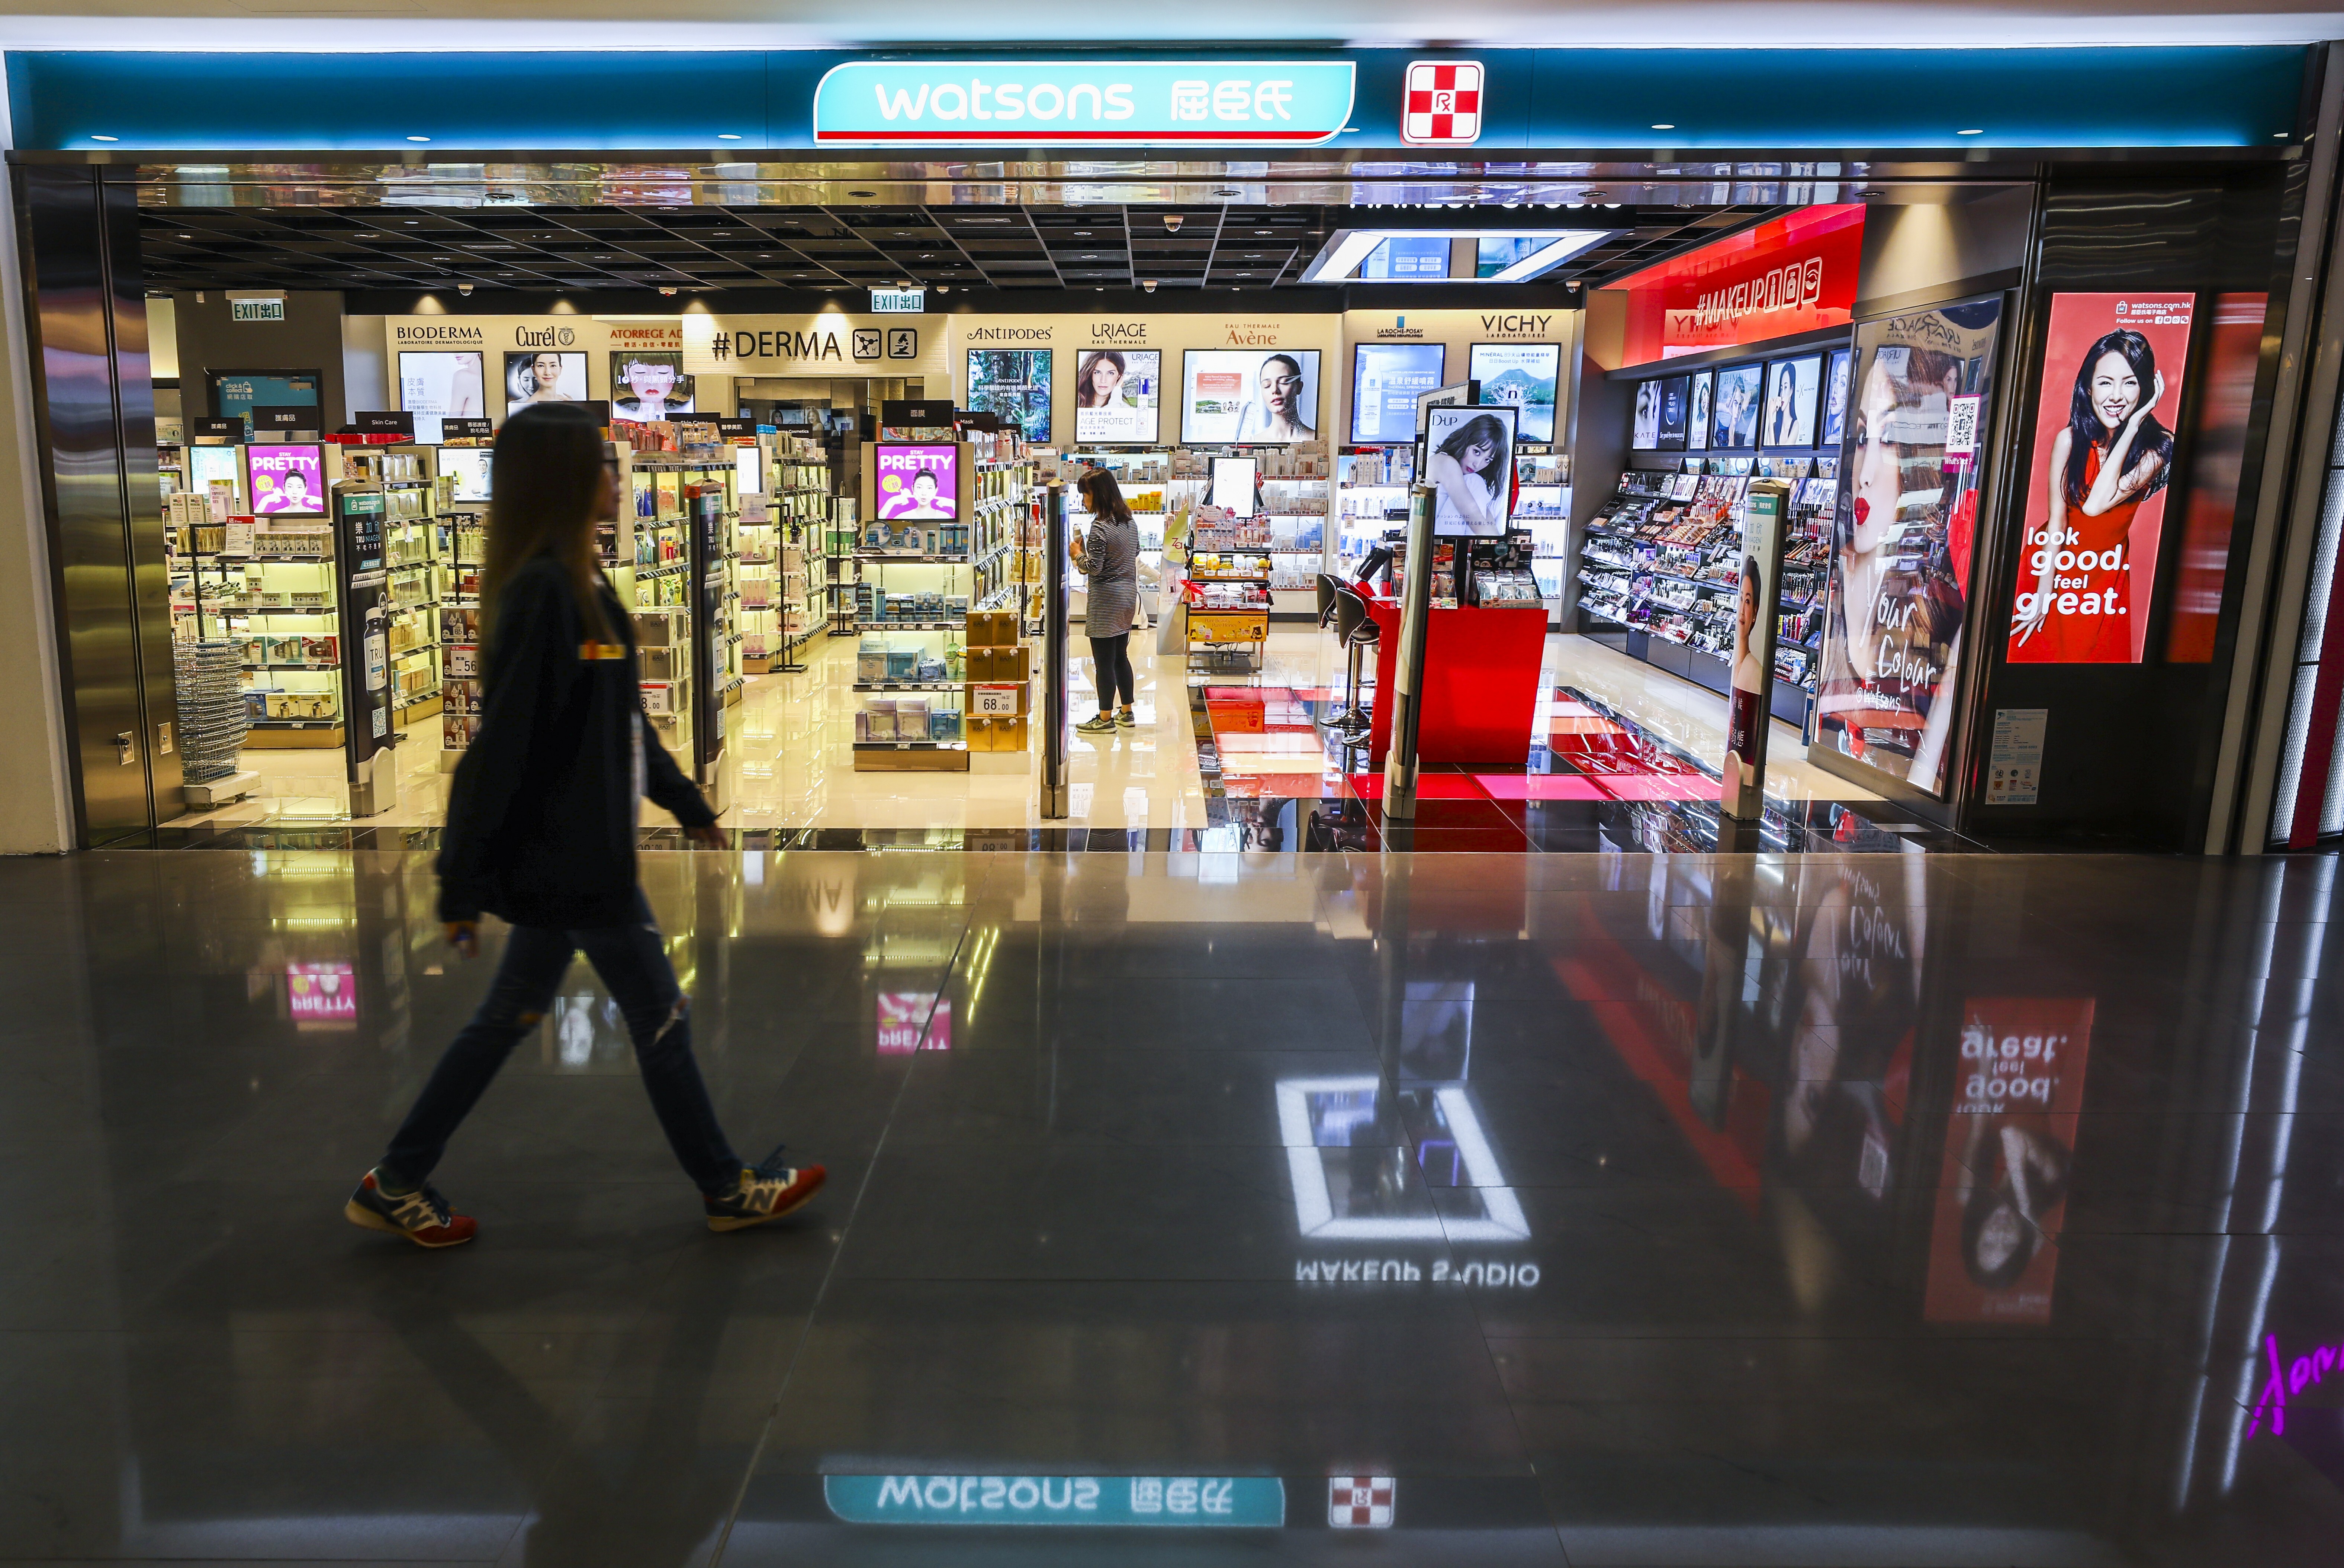 AS Watson operates more than 7,800 Watsons stores across Asia and Europe. Photo: SCMP Photos